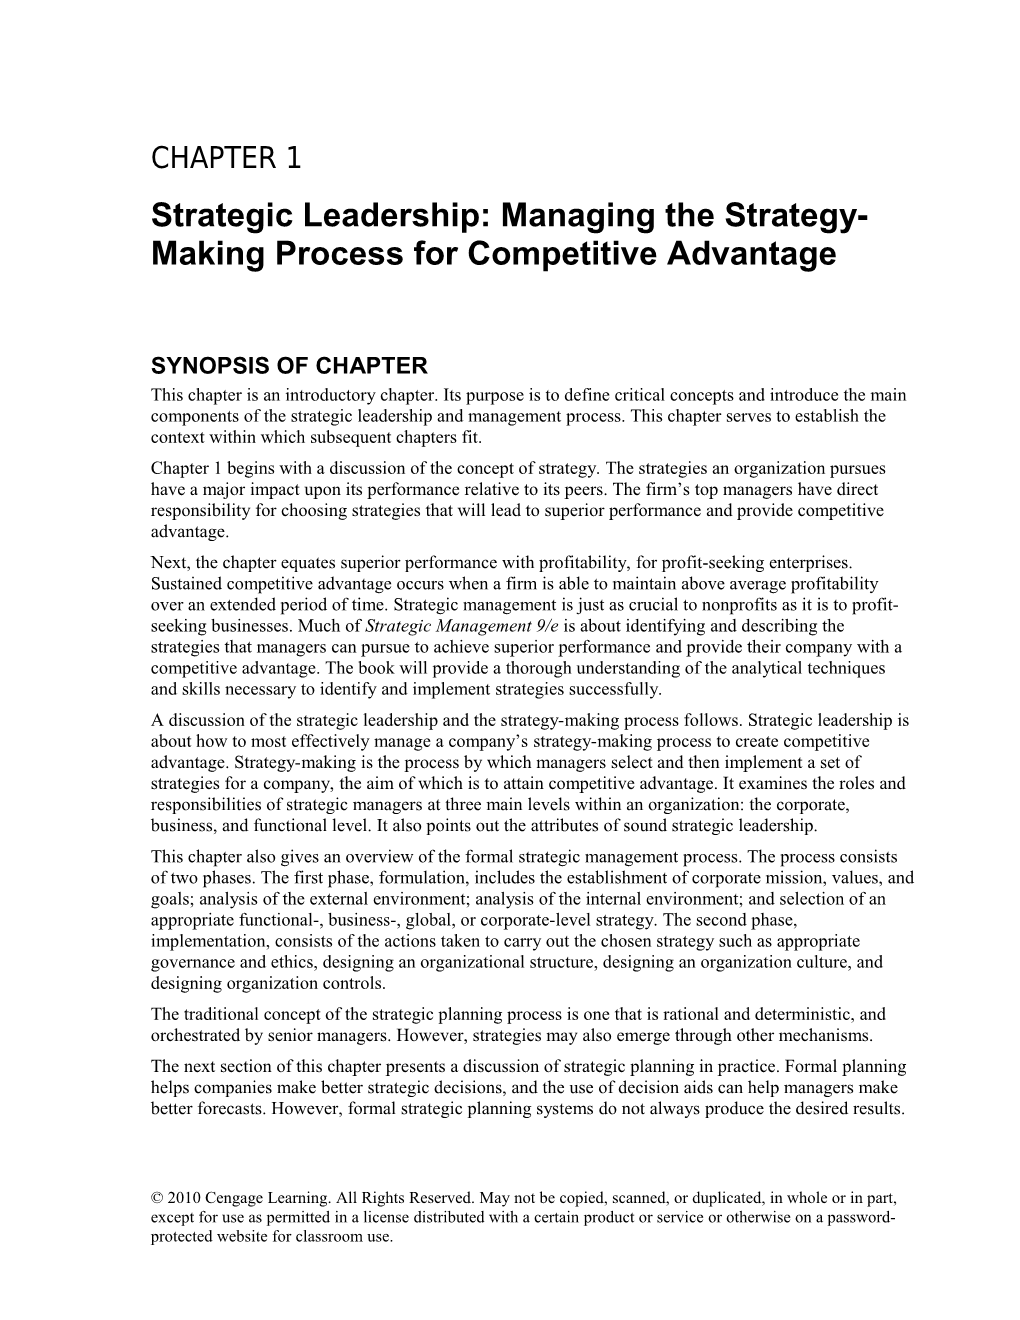 Chapter 1: Strategic Leadership: Managing the Strategy-Making Process for Competitive